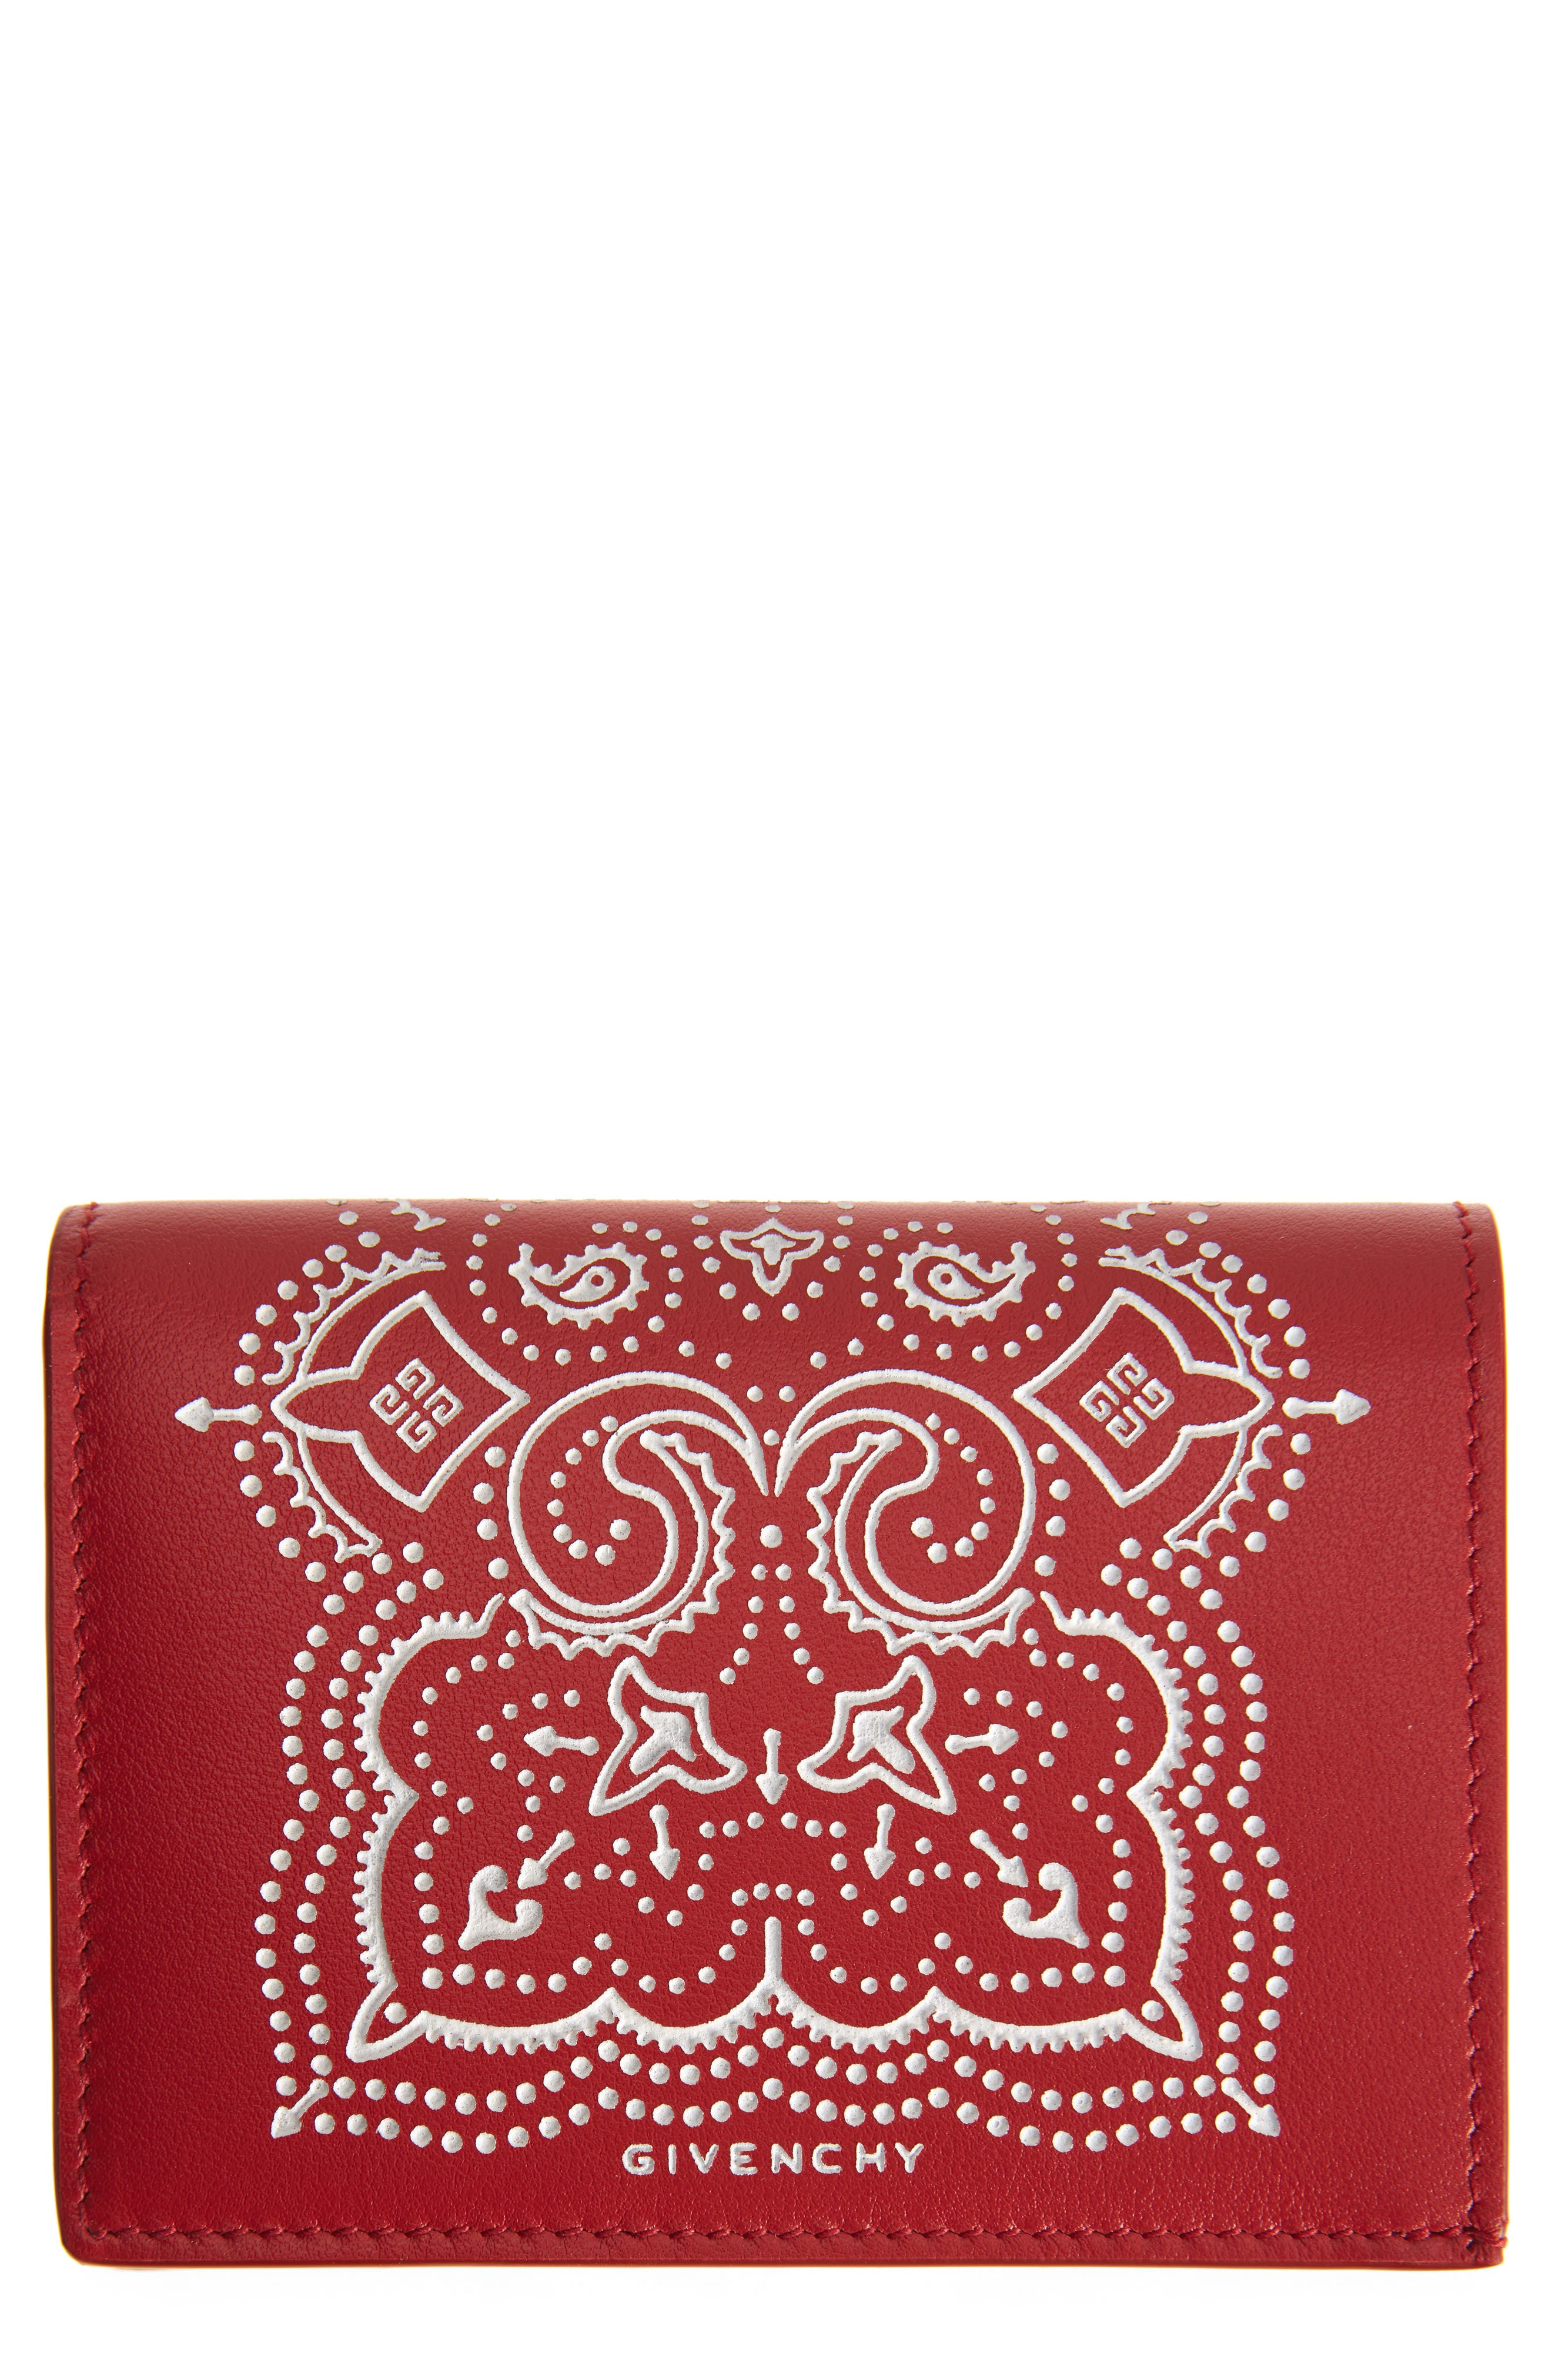 Givenchy Bandana Print Bifold Leather Card Case in Red at Nordstrom